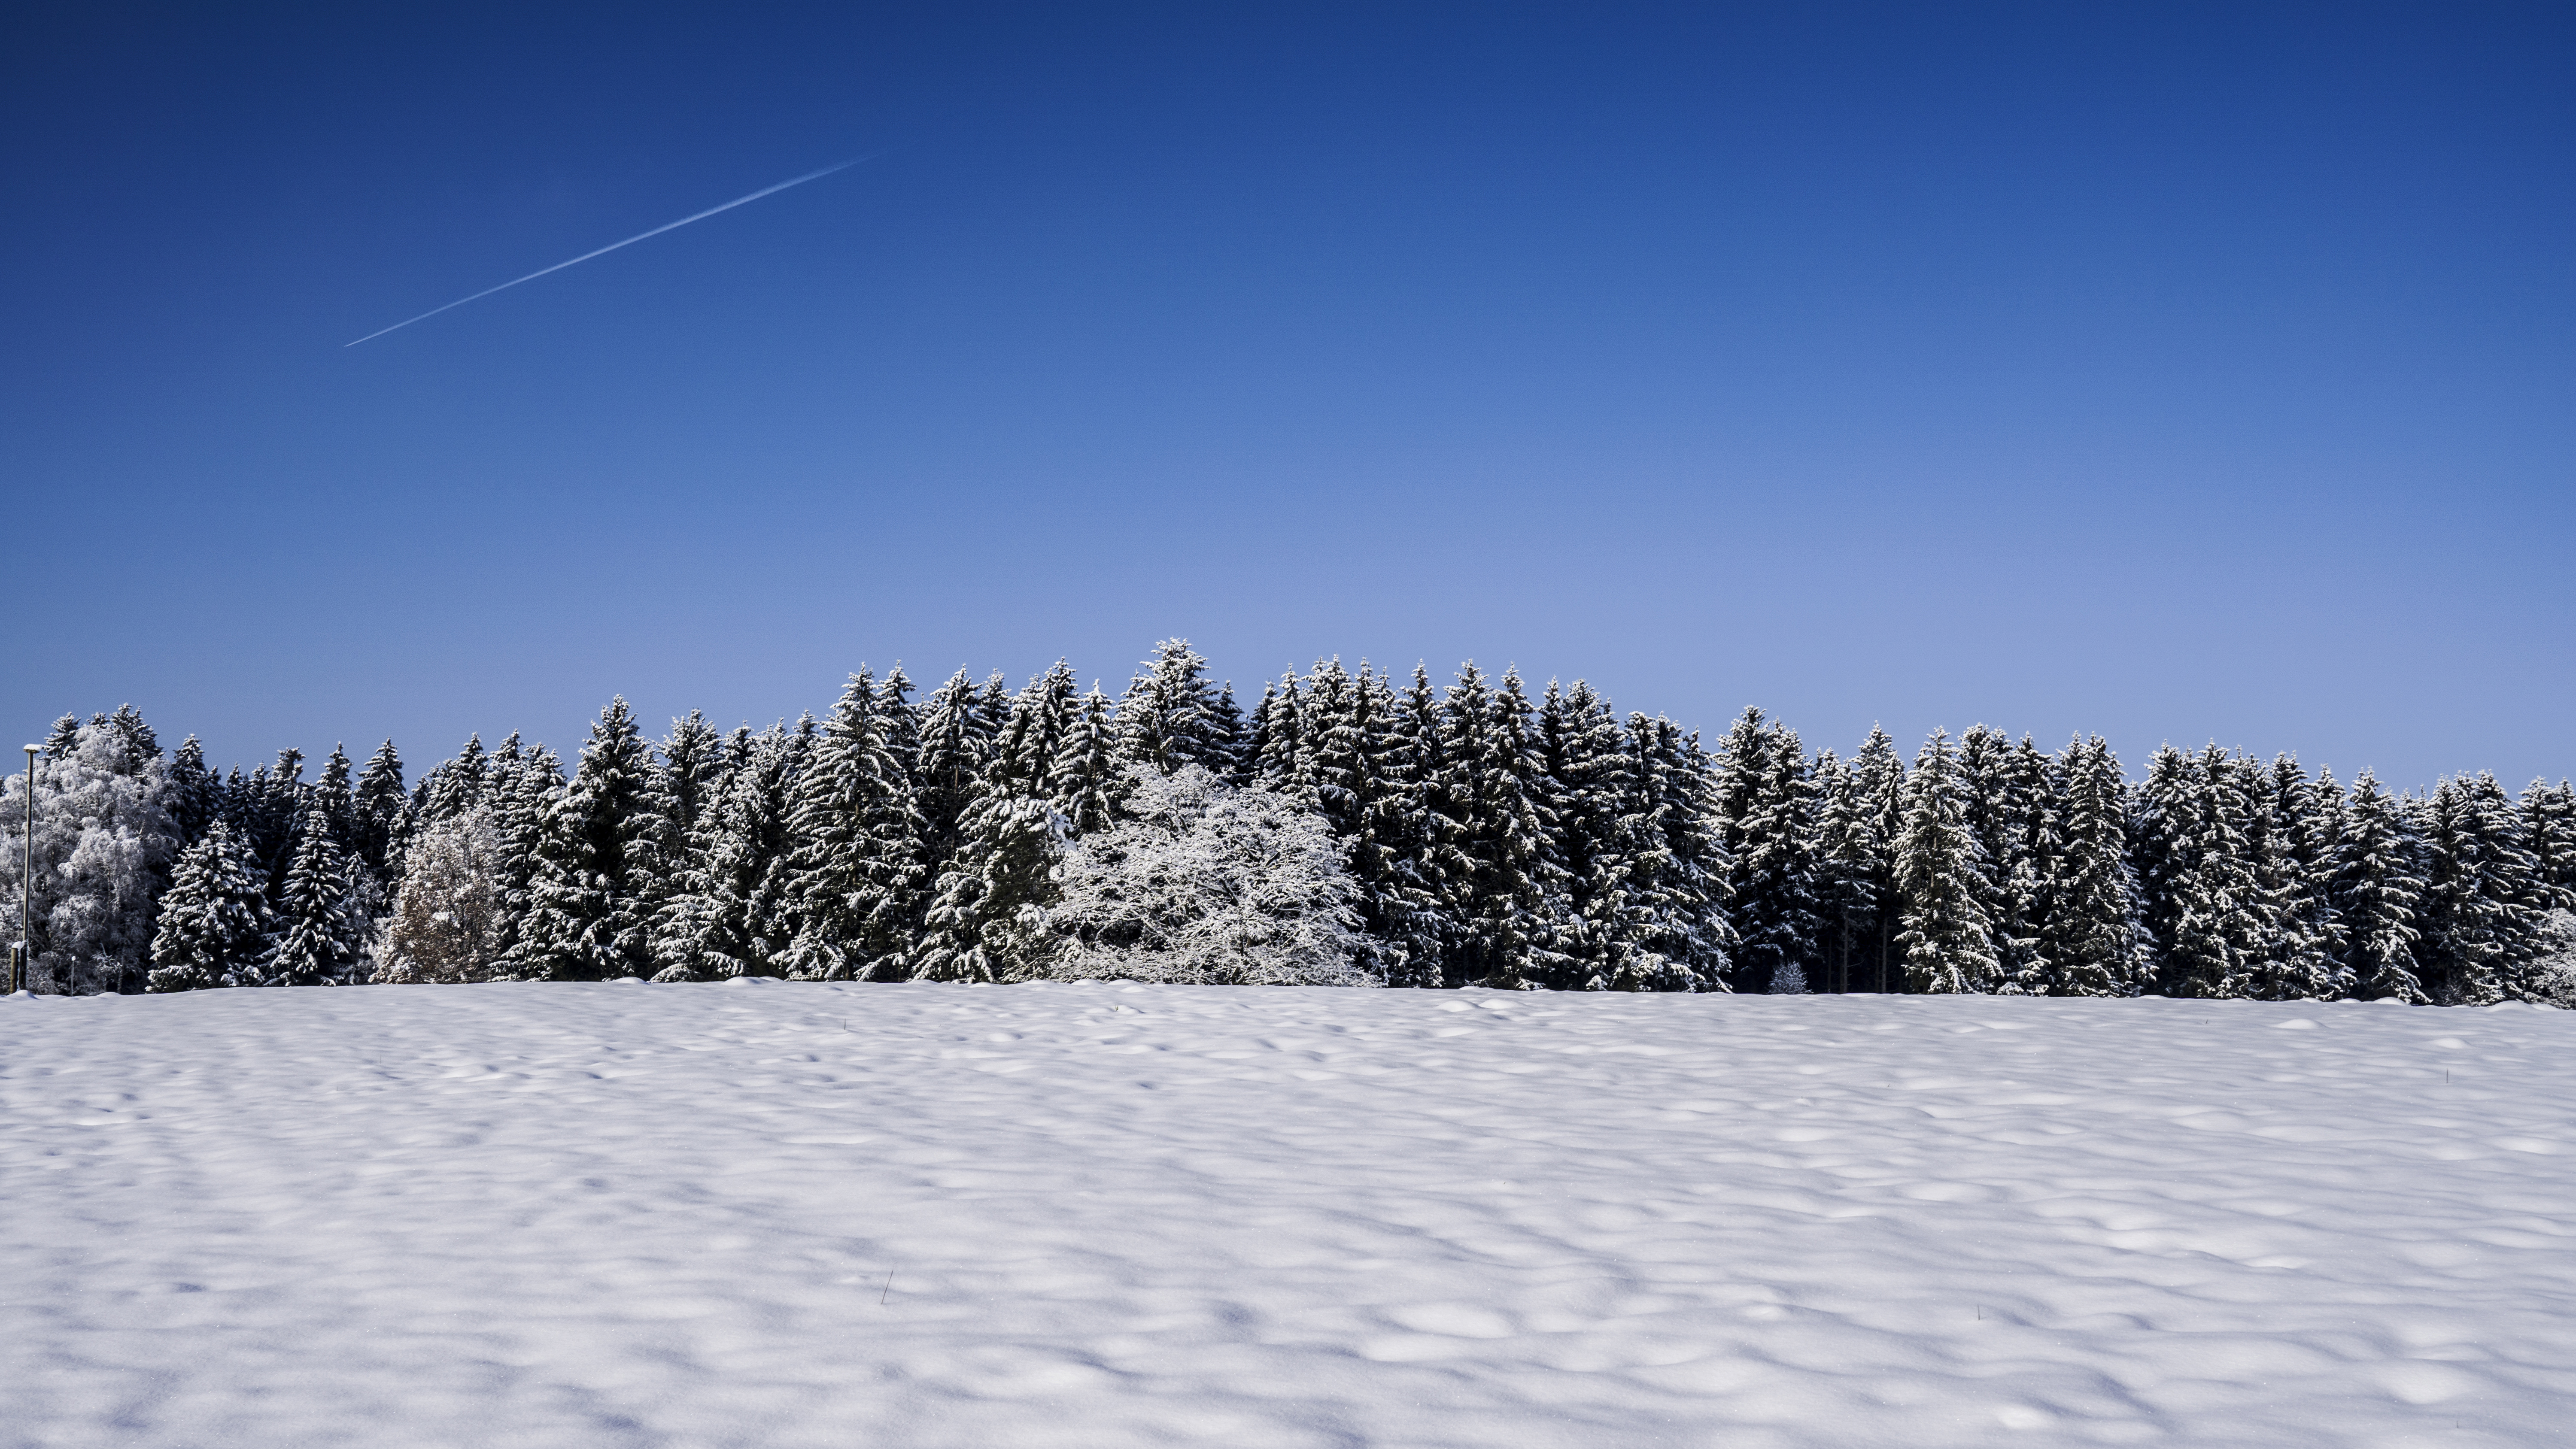 General 6000x3376 nature landscape trees snow winter outdoors sky wide angle contrails